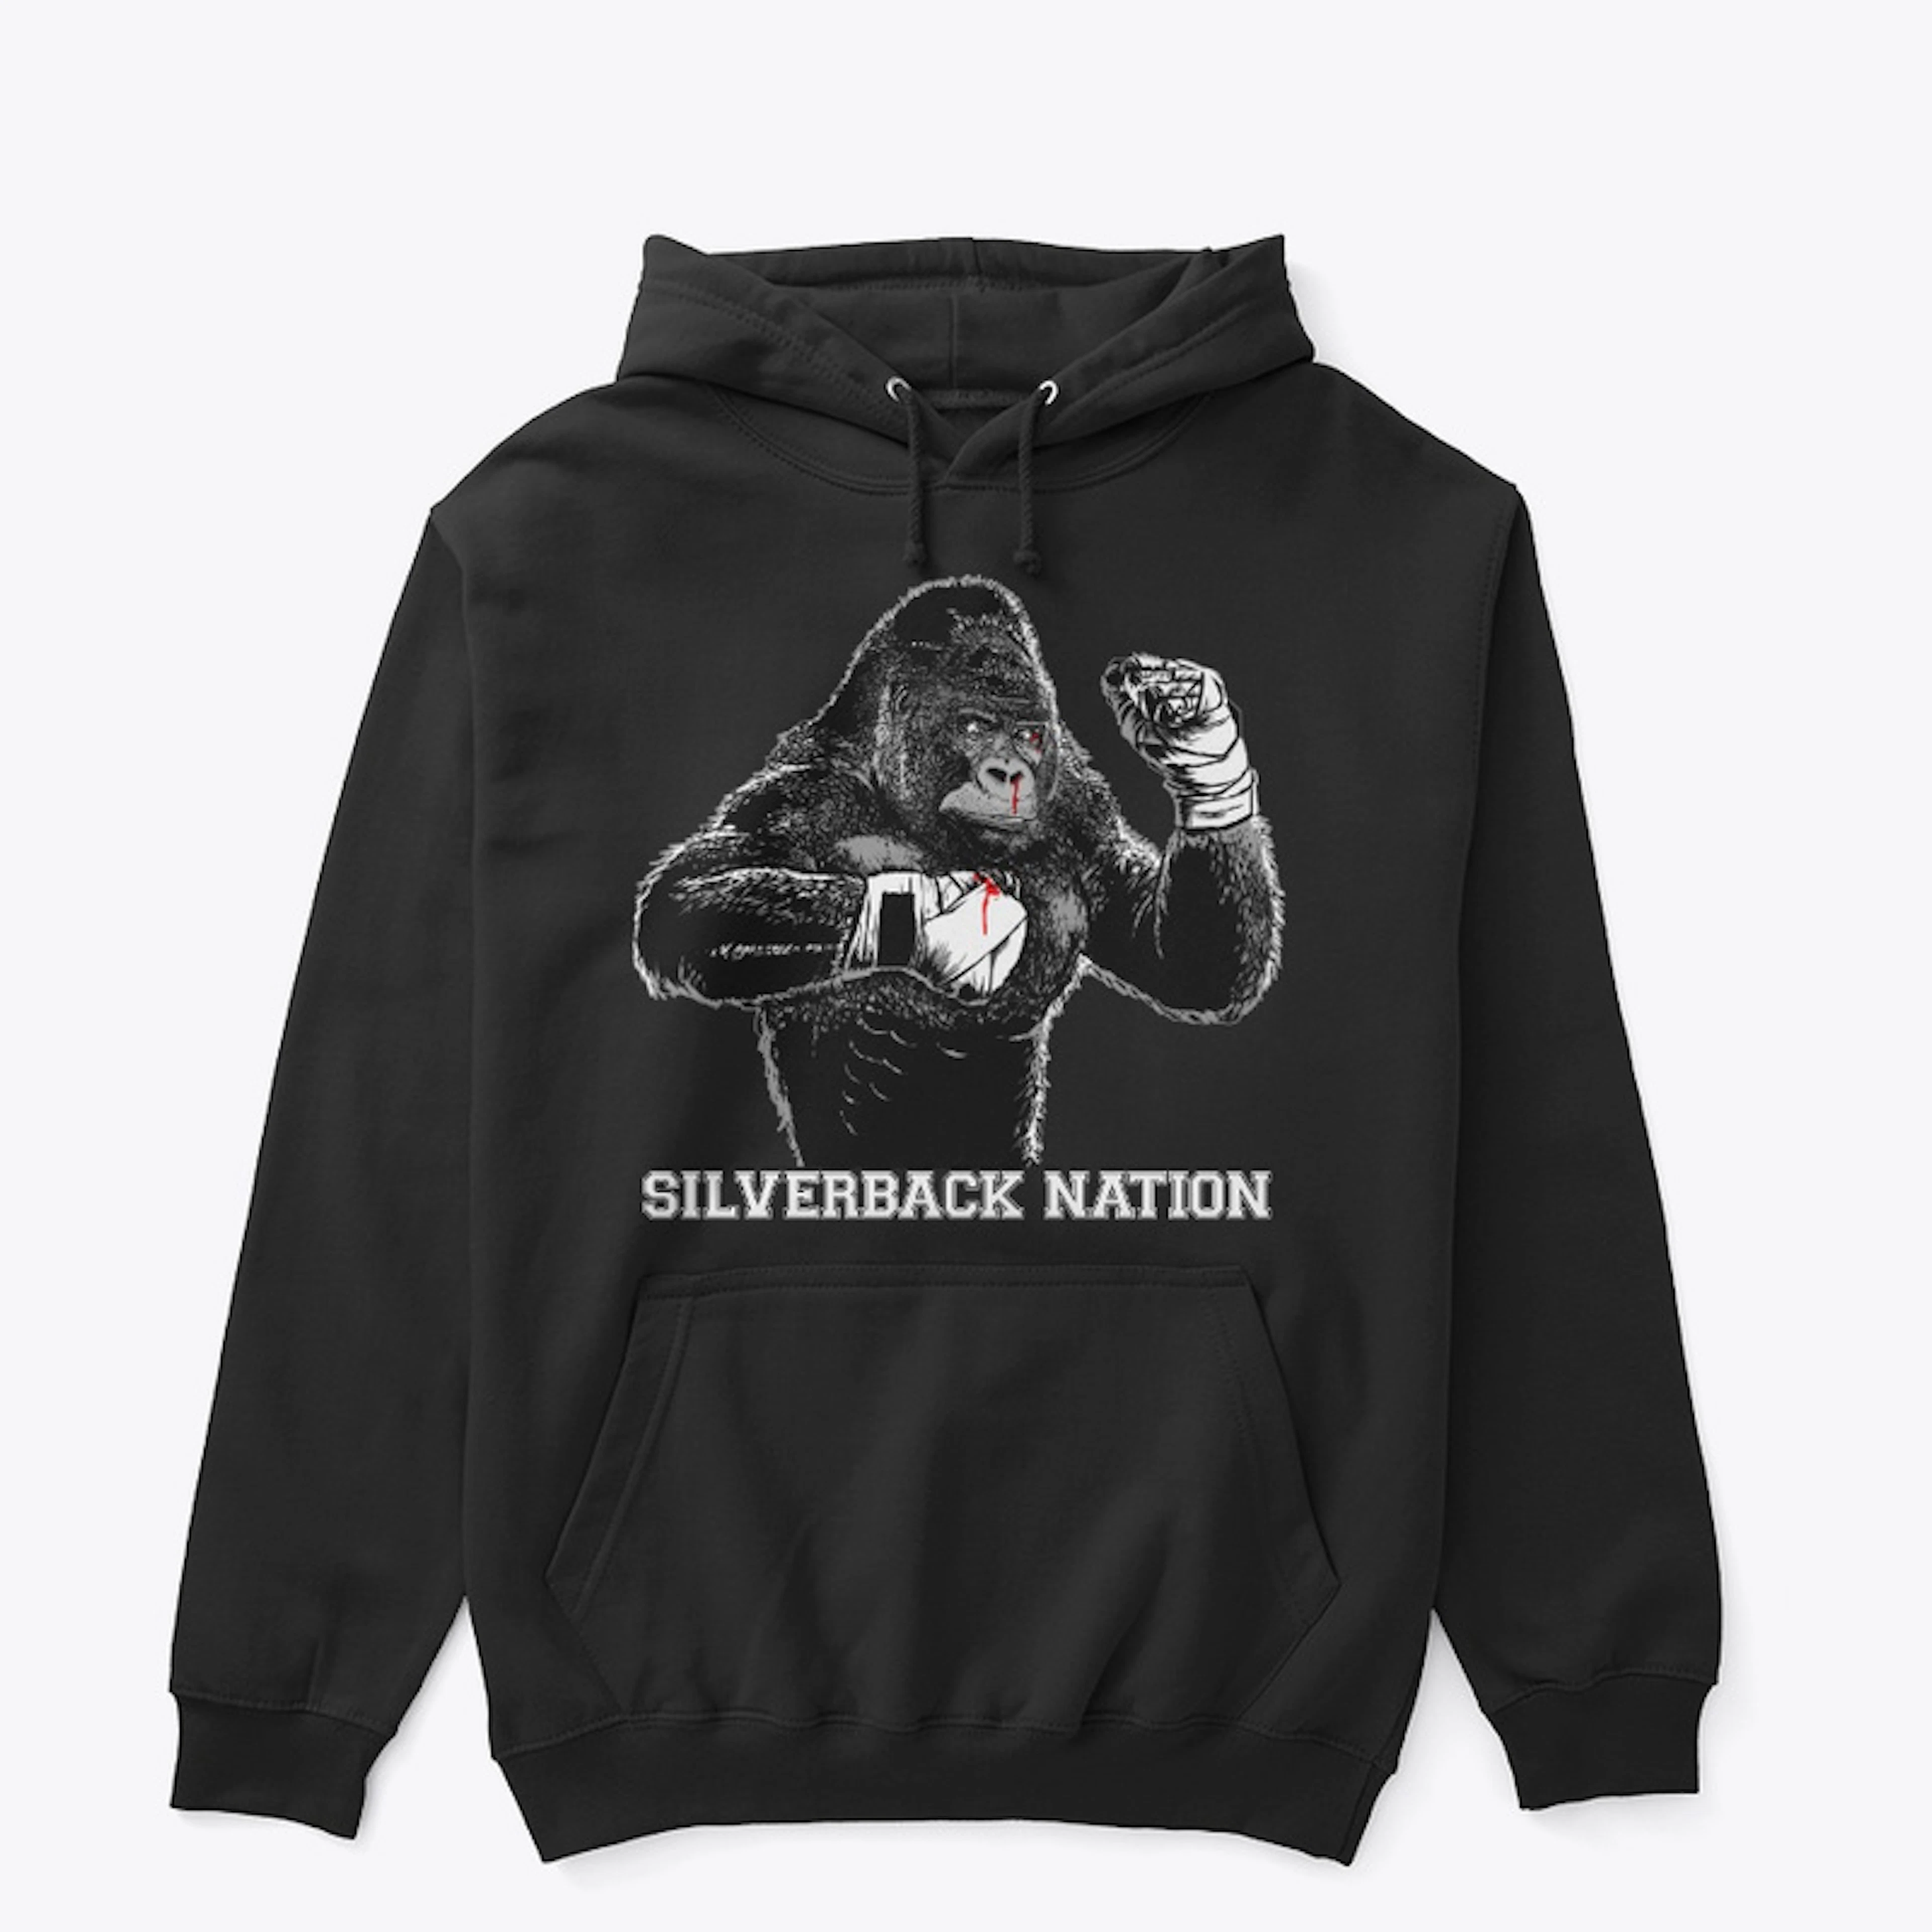 Silverback Nation Pull Over Hoodie